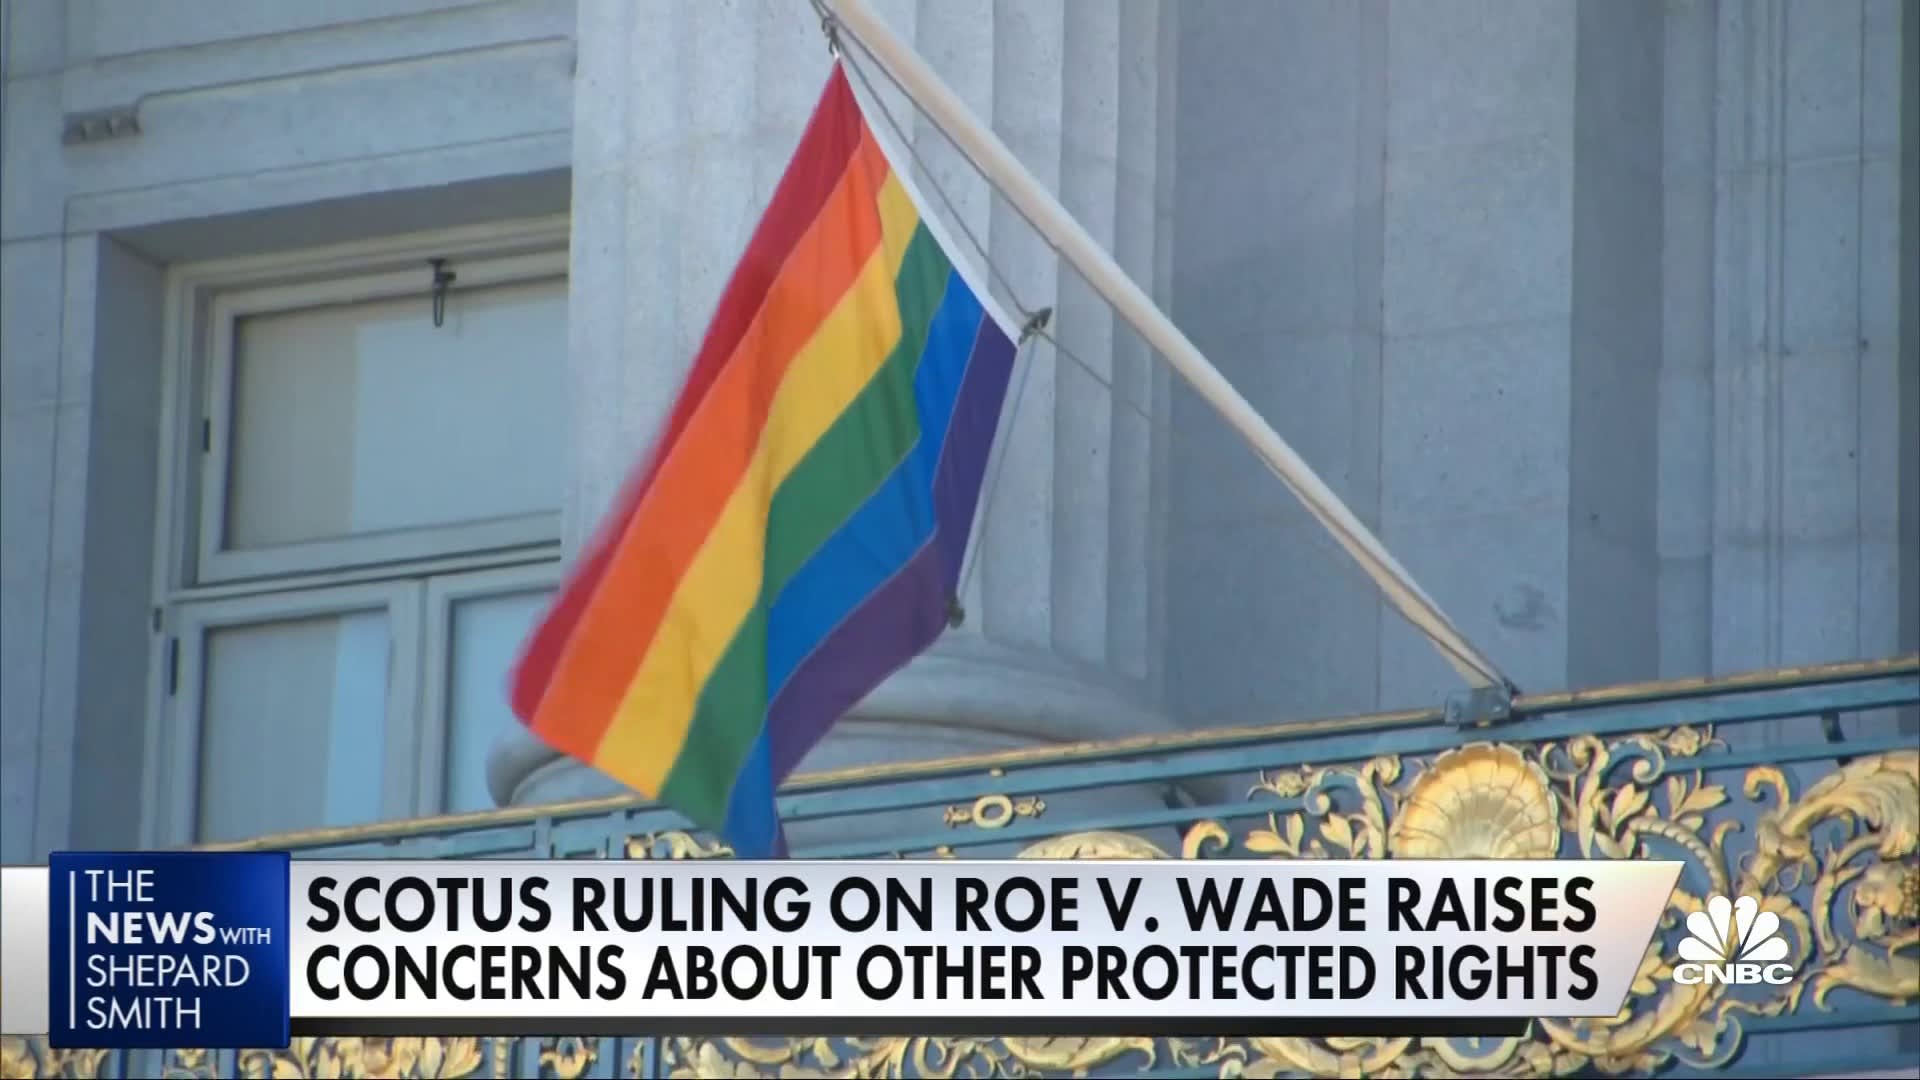 SCOTUS ruling raises questions about other rights not spelled out in the Constitution